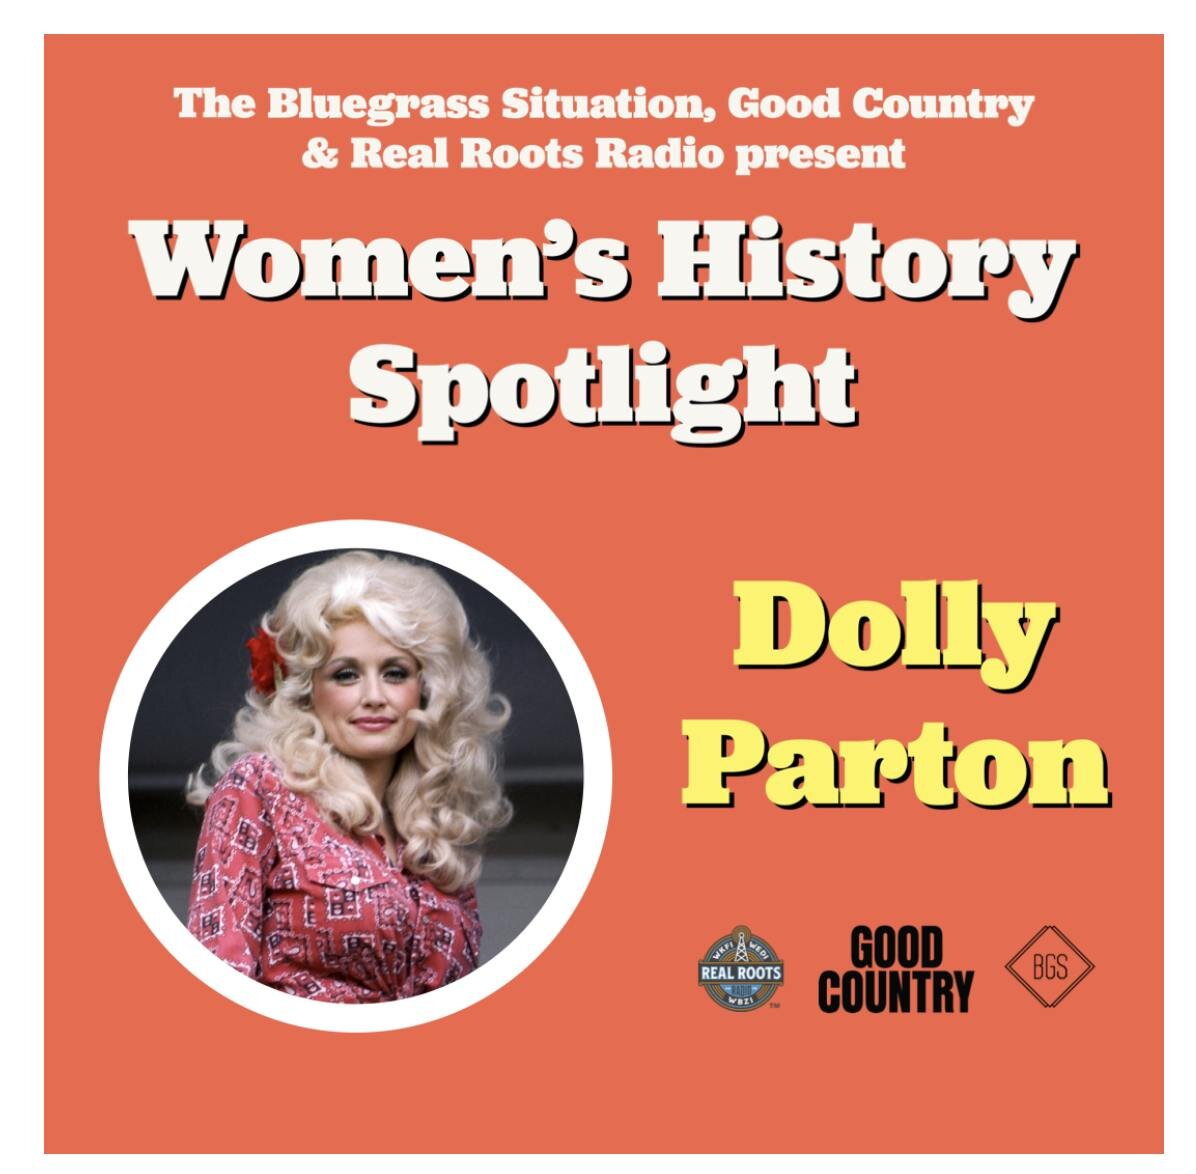 You knew it was coming. You can&rsquo;t tell the story of country music (or American pop culture) without Dolly Parton. Growing up in Sevier County, Tennessee, she is not just the Queen of the Smoky Mountains, but quite possible the Queen of the Univ